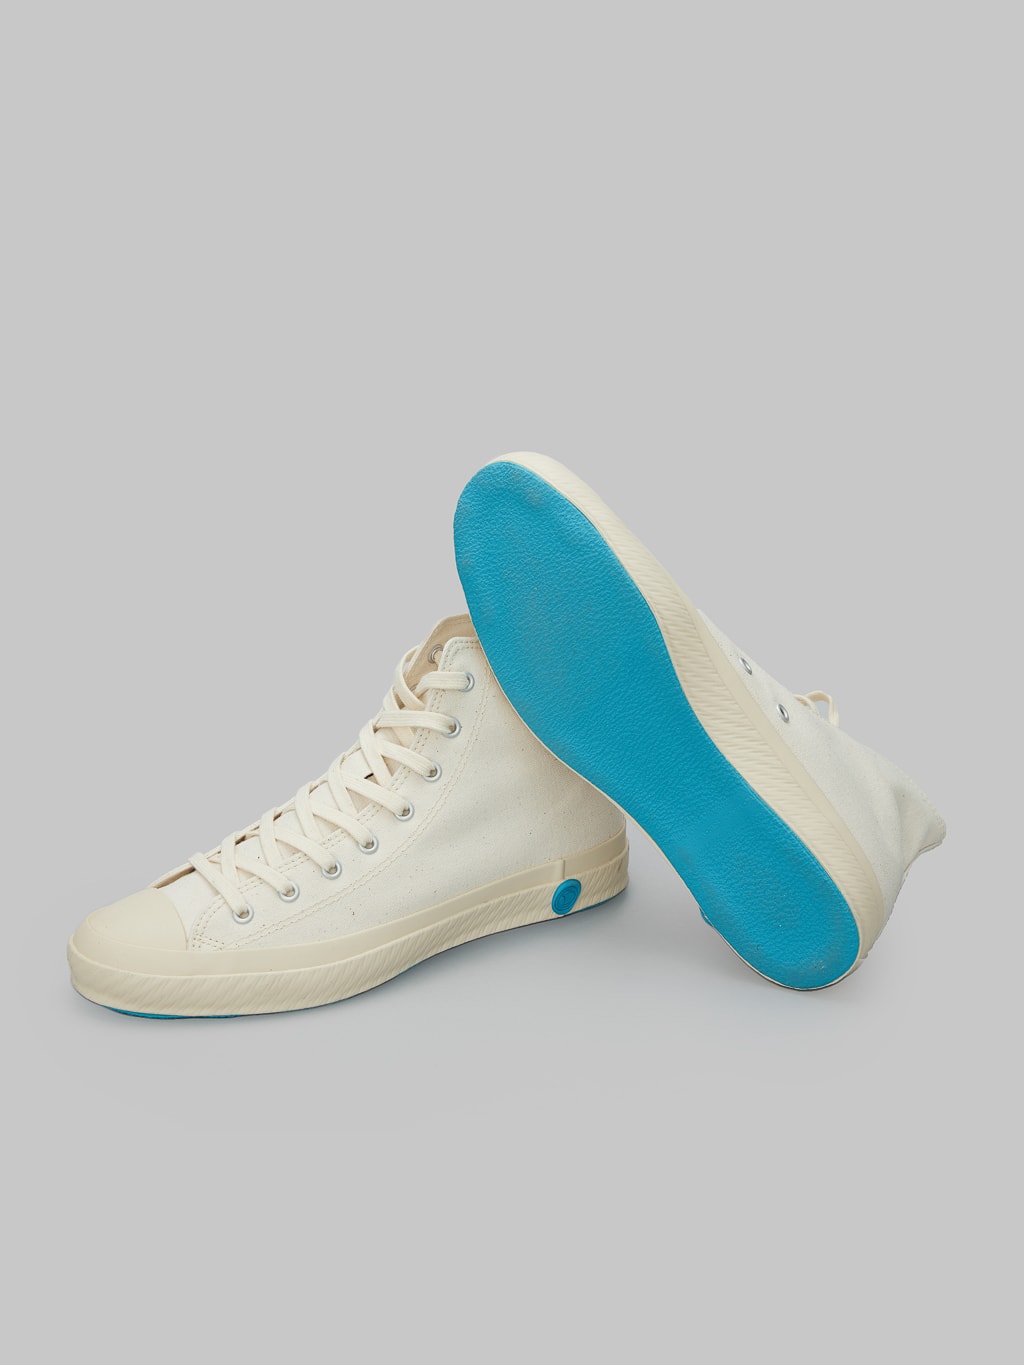 Shoes like pottery high sneaker white rubber sole